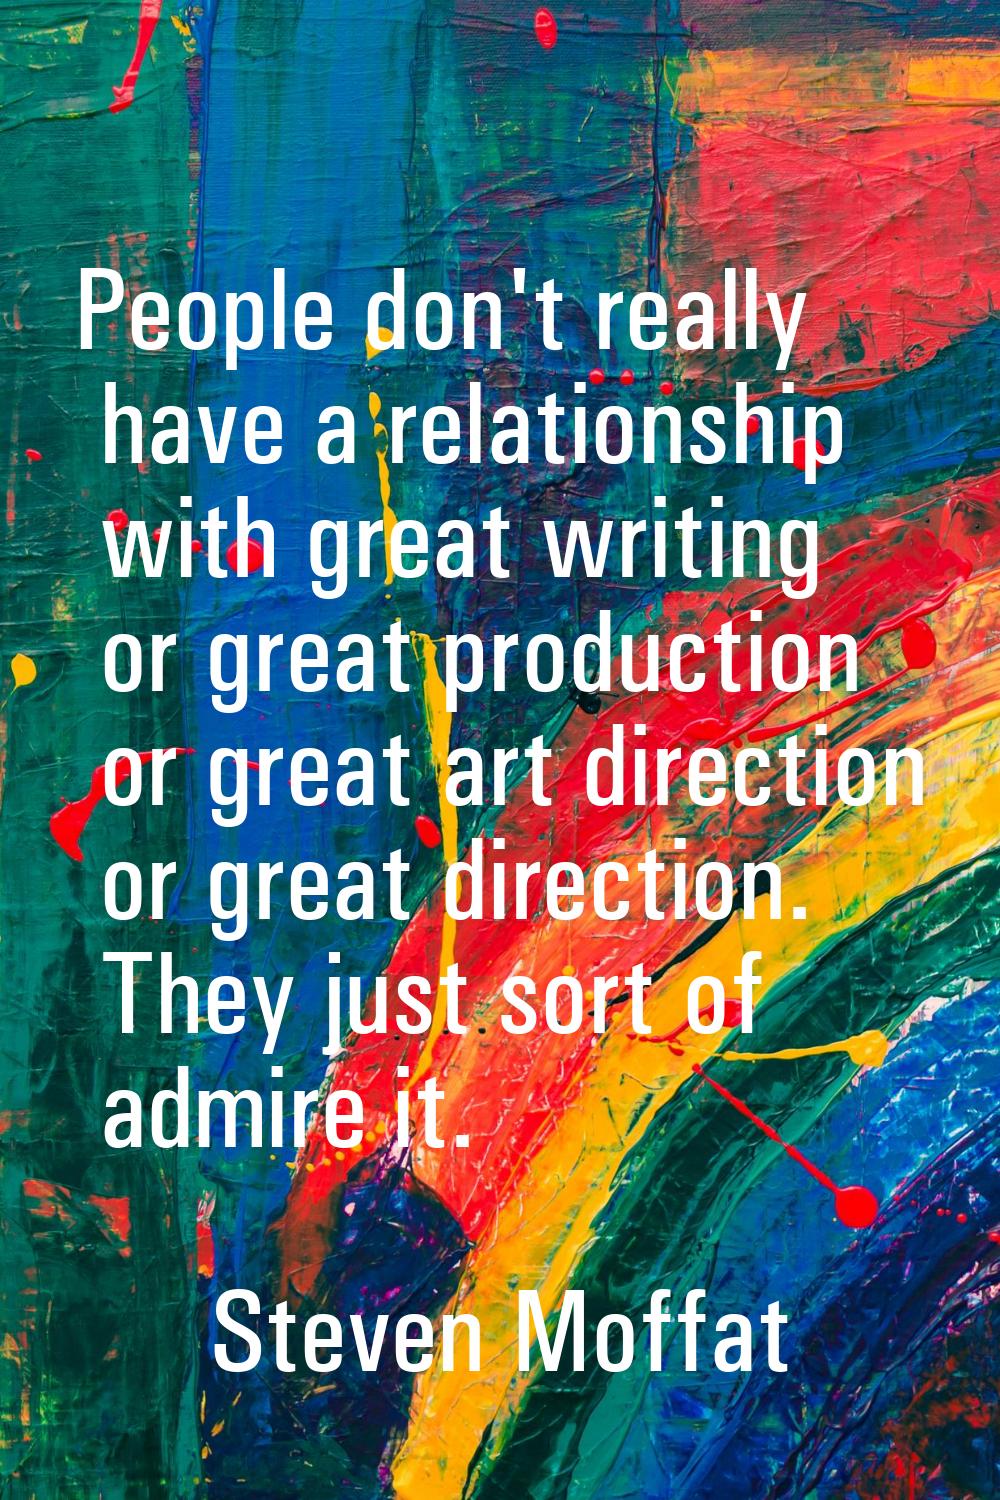 People don't really have a relationship with great writing or great production or great art directi